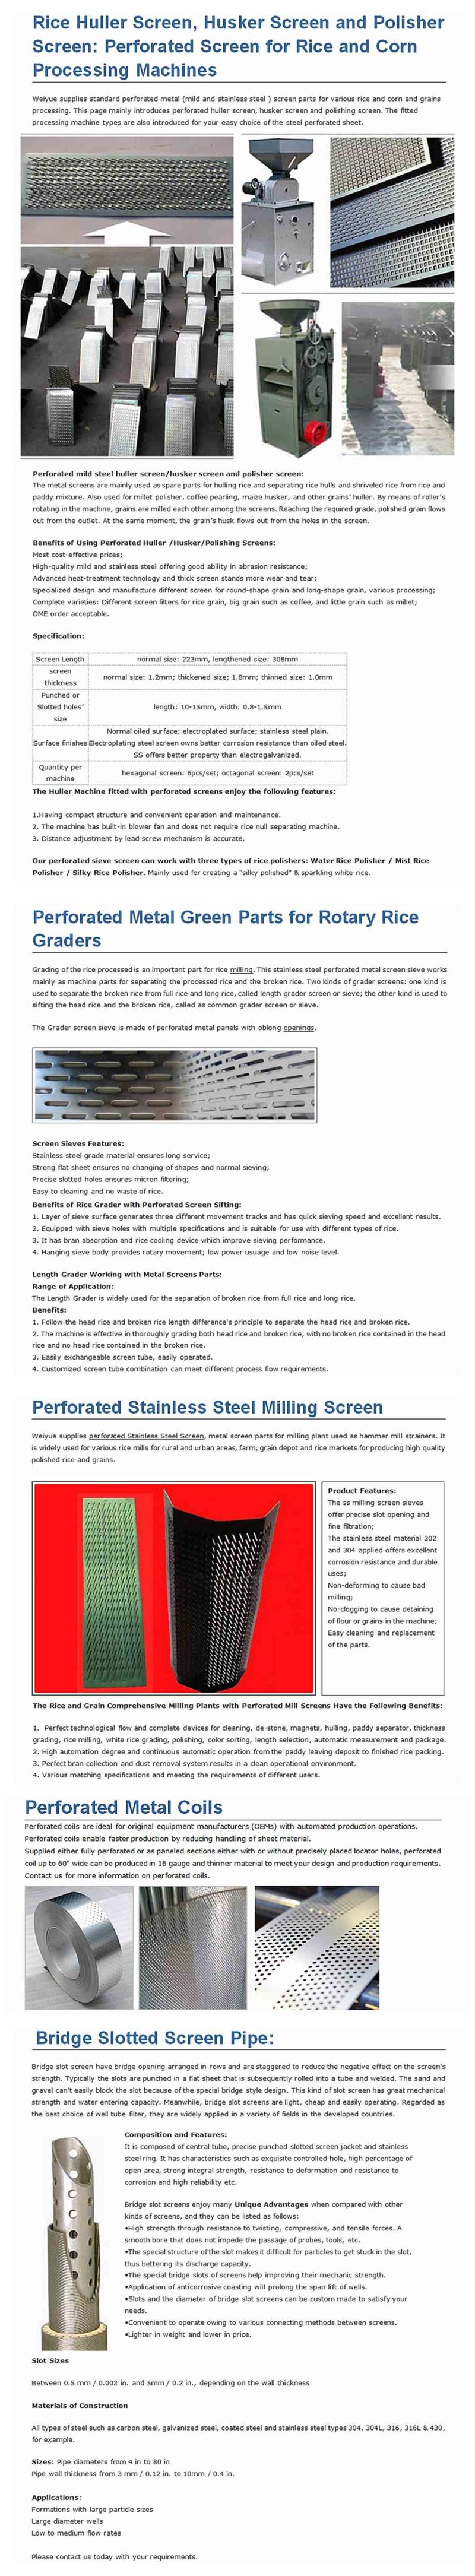 High Quality Stainless Steel Perforated Sheet Metal for Filtration